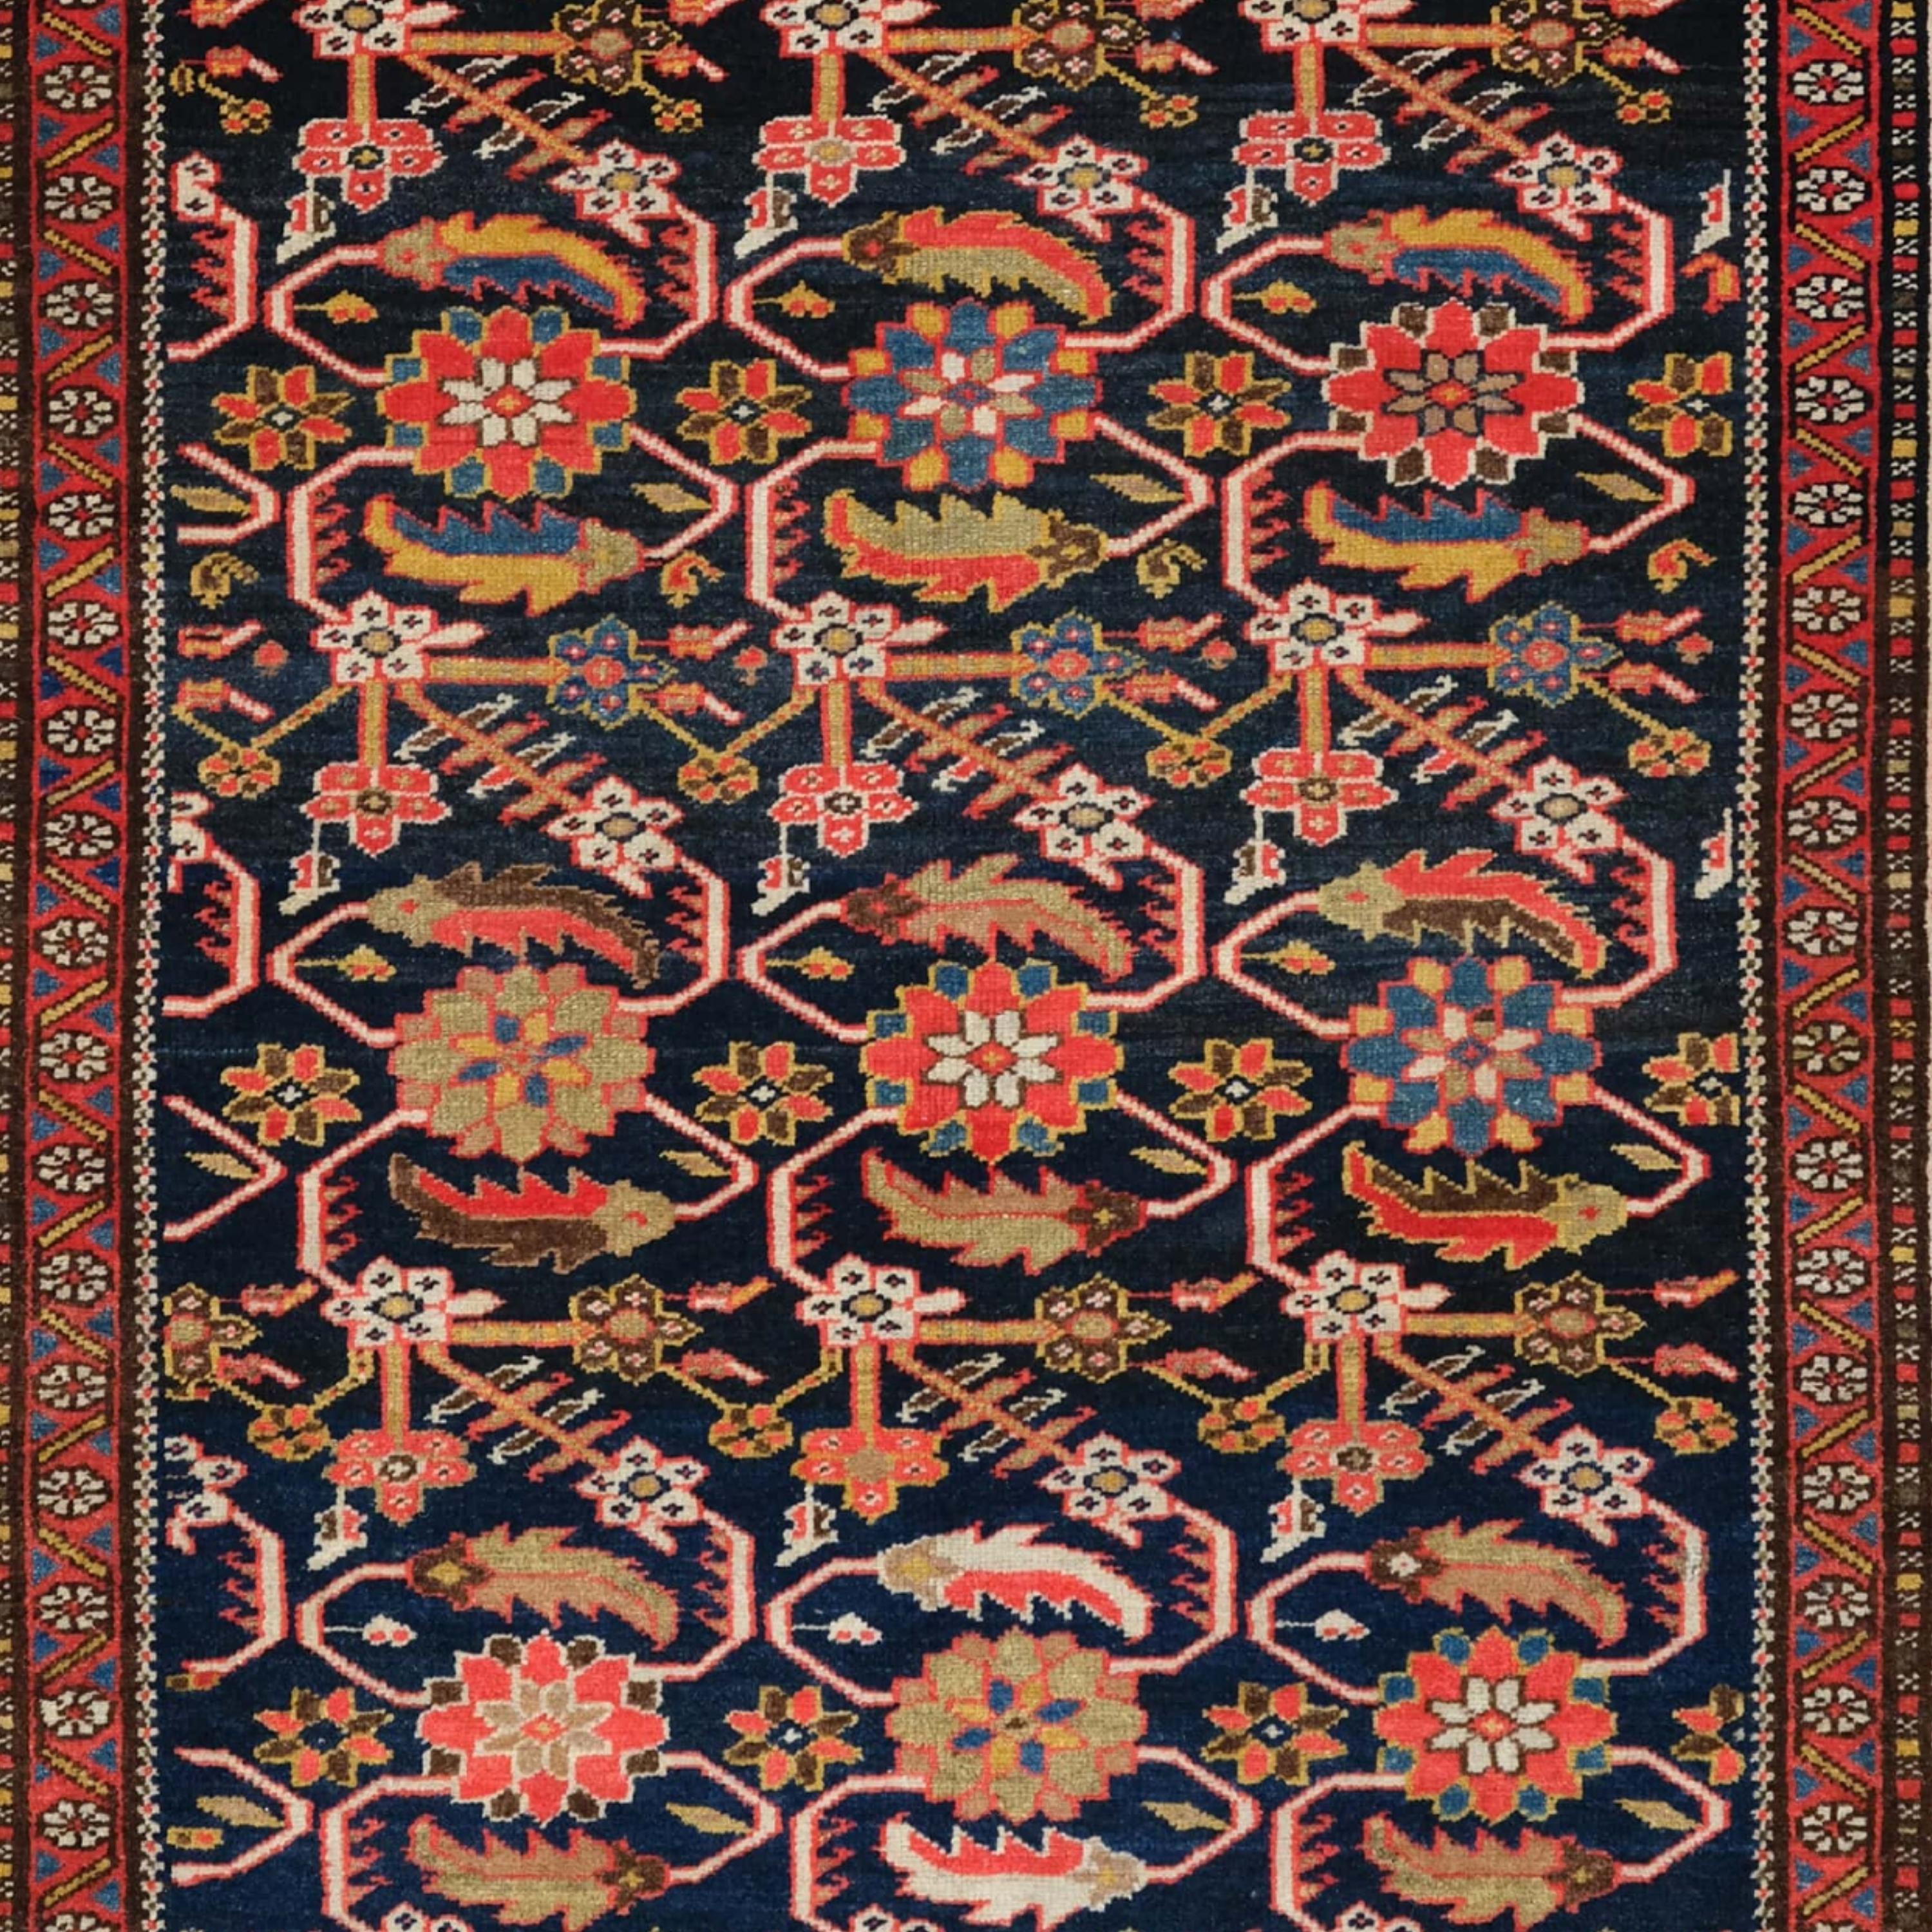 Asian Antique Melayer Rug - Late of 19th Century Melayer Rug, Antique Rug For Sale